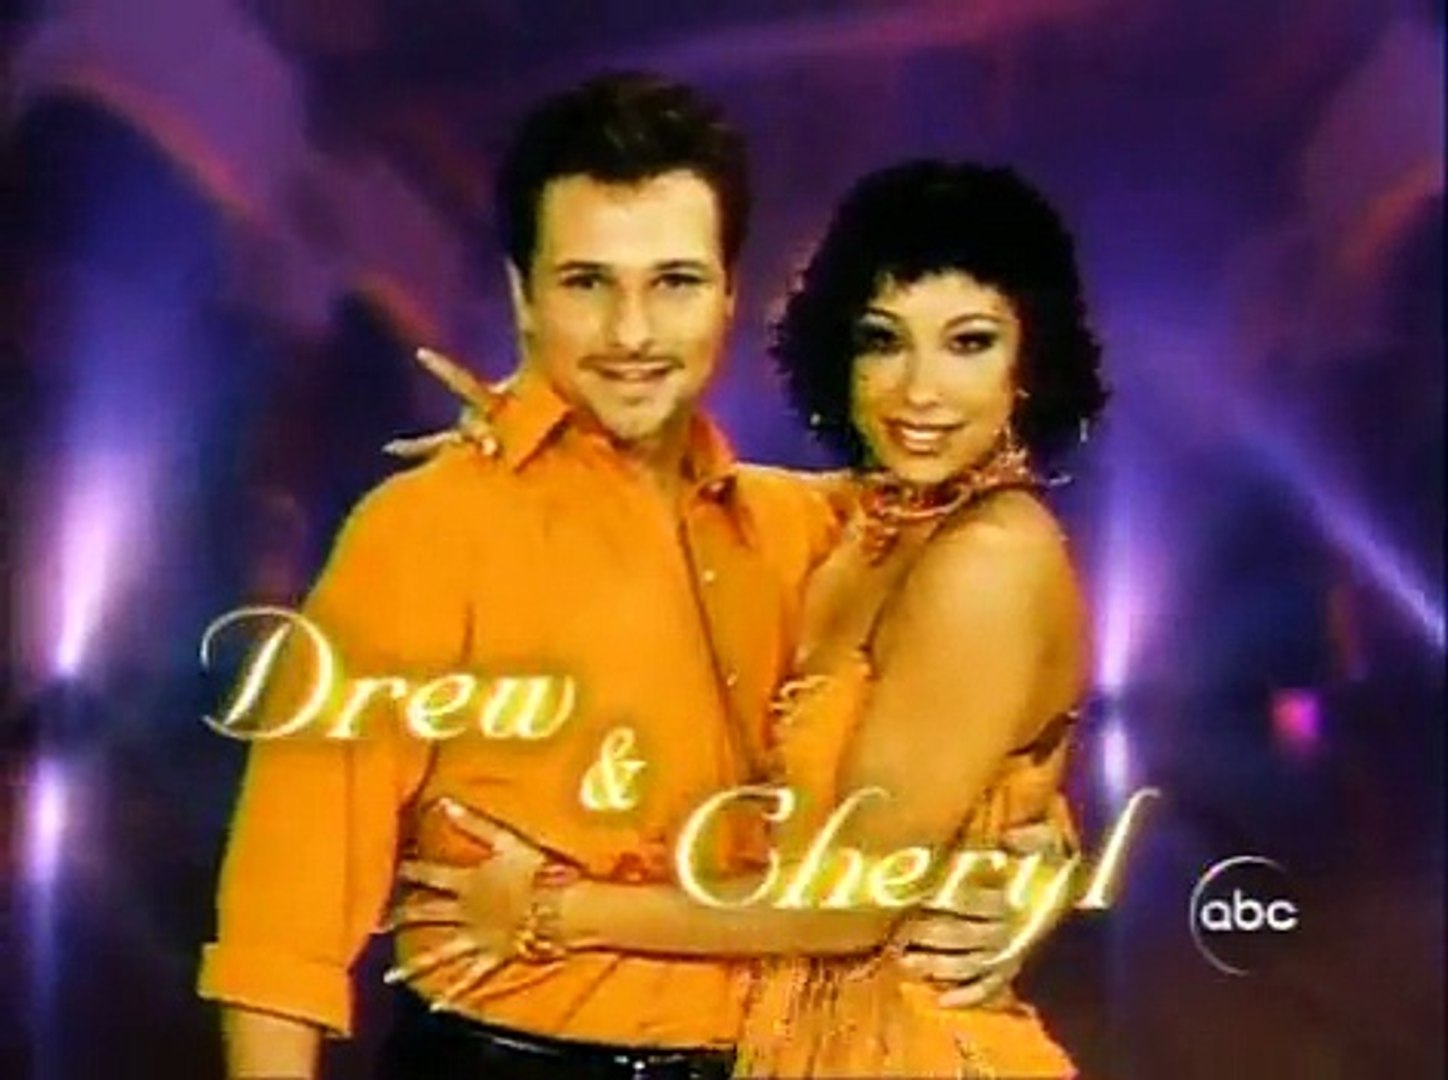 Drew Lachey Dancing With The Stars All-Stars Fox Trot Performance Video  9/24/12